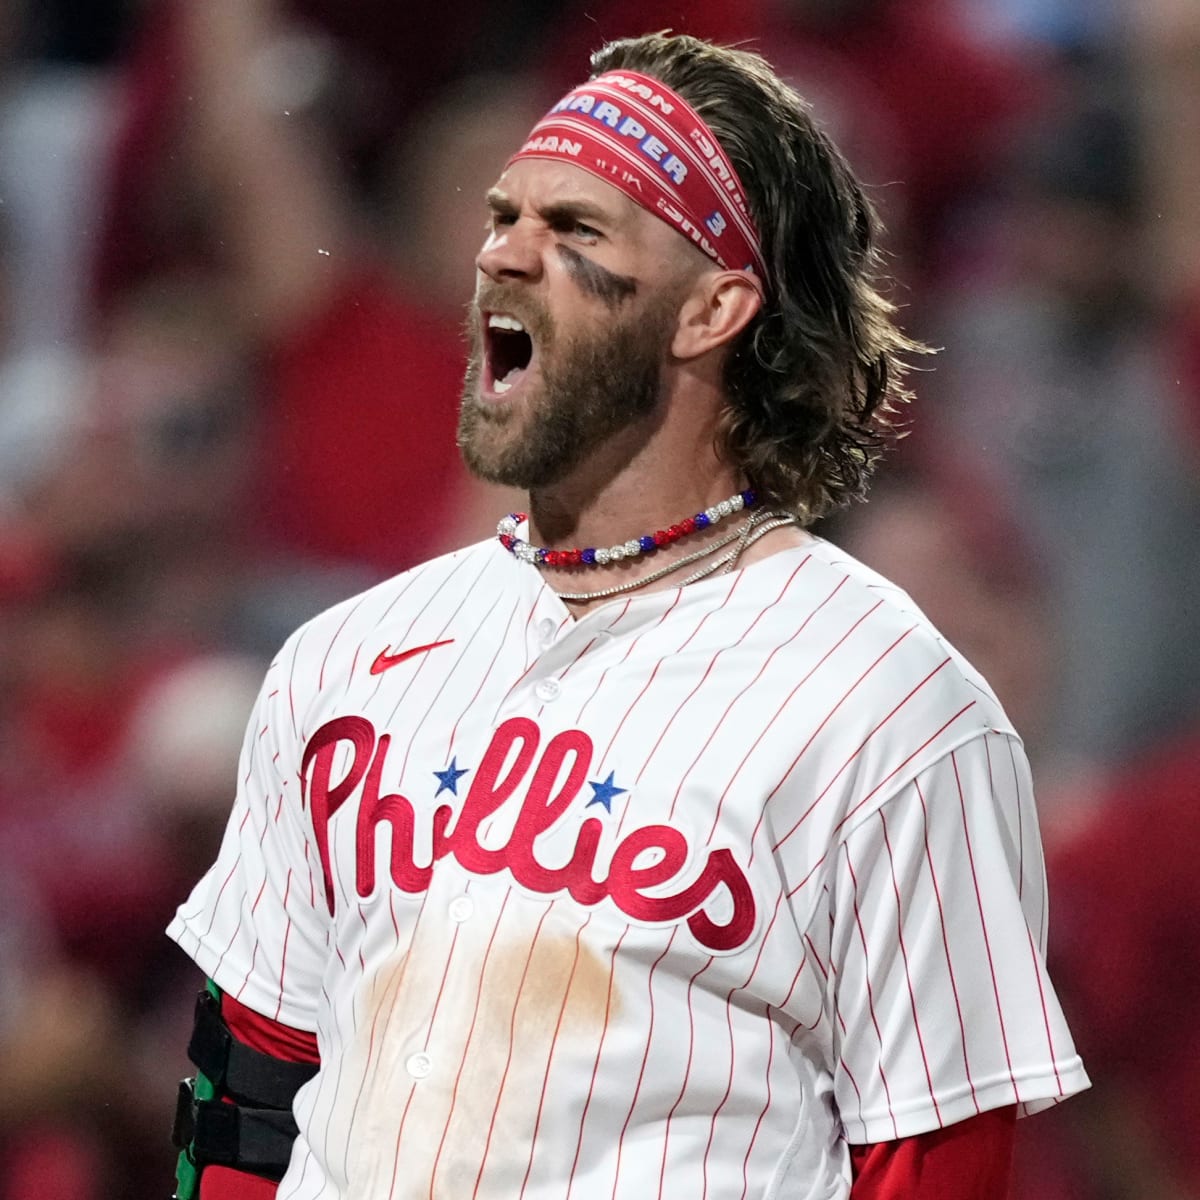 Bryce Harper Brings Some Deion Sanders Swagger to Ballpark for Braves- Phillies Game 3 - Sports Illustrated